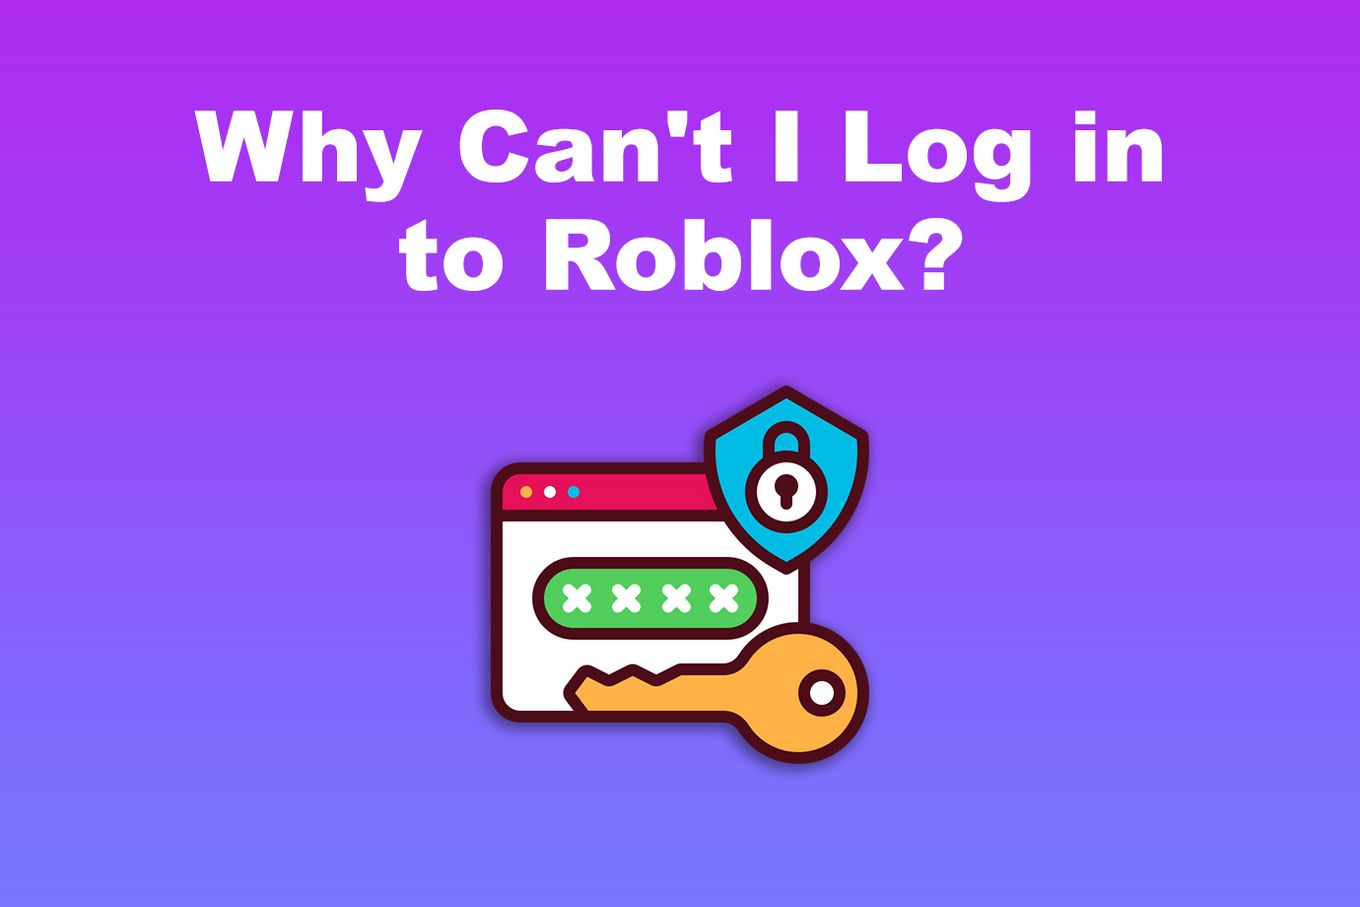 Why I can't log in to Roblox?